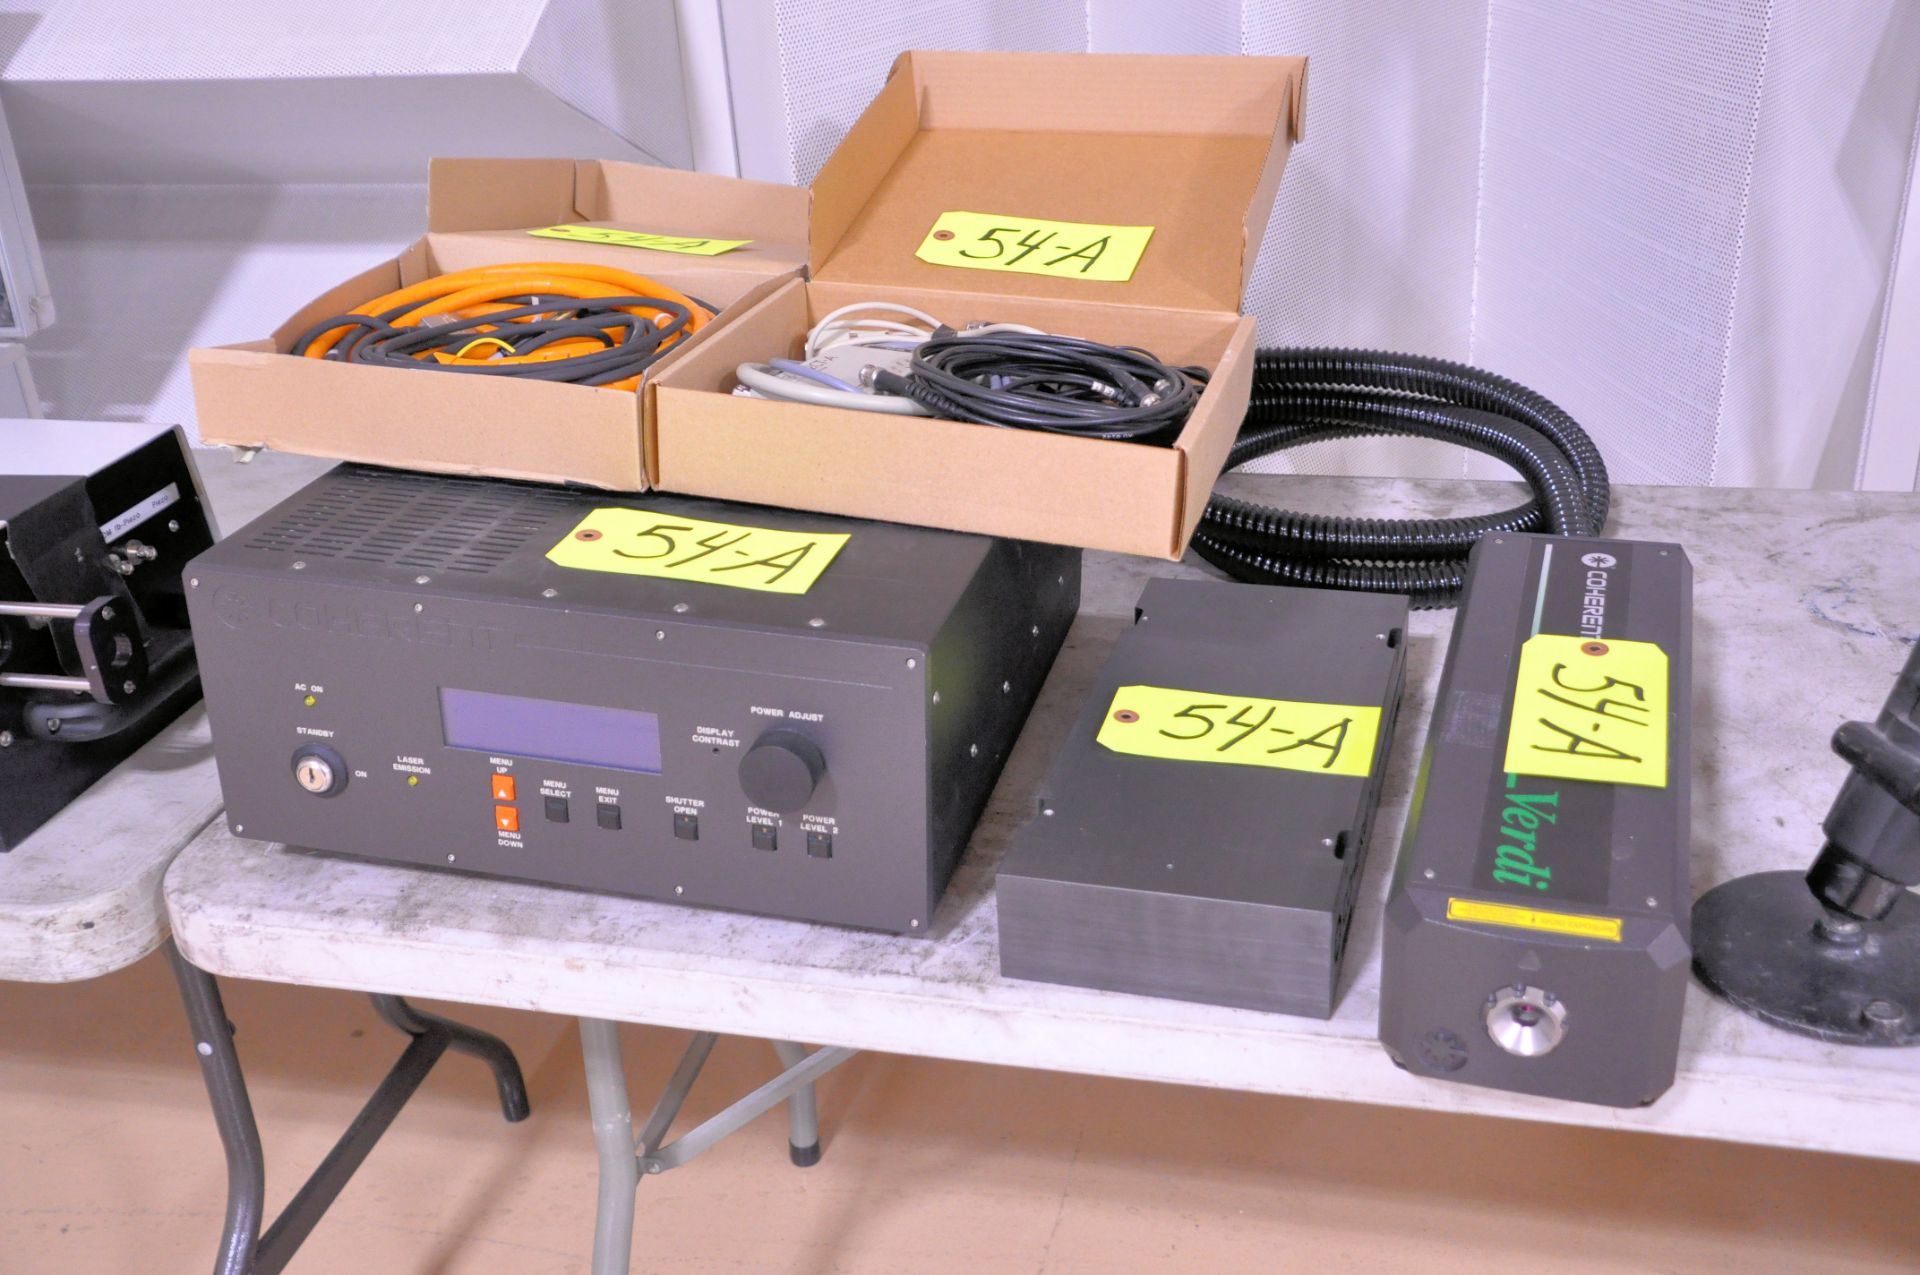 2002 Coherent Verdi V-5 Model Verdi-5W Scientific Laser with Power Supply and Cables, S/n V5-A6040R